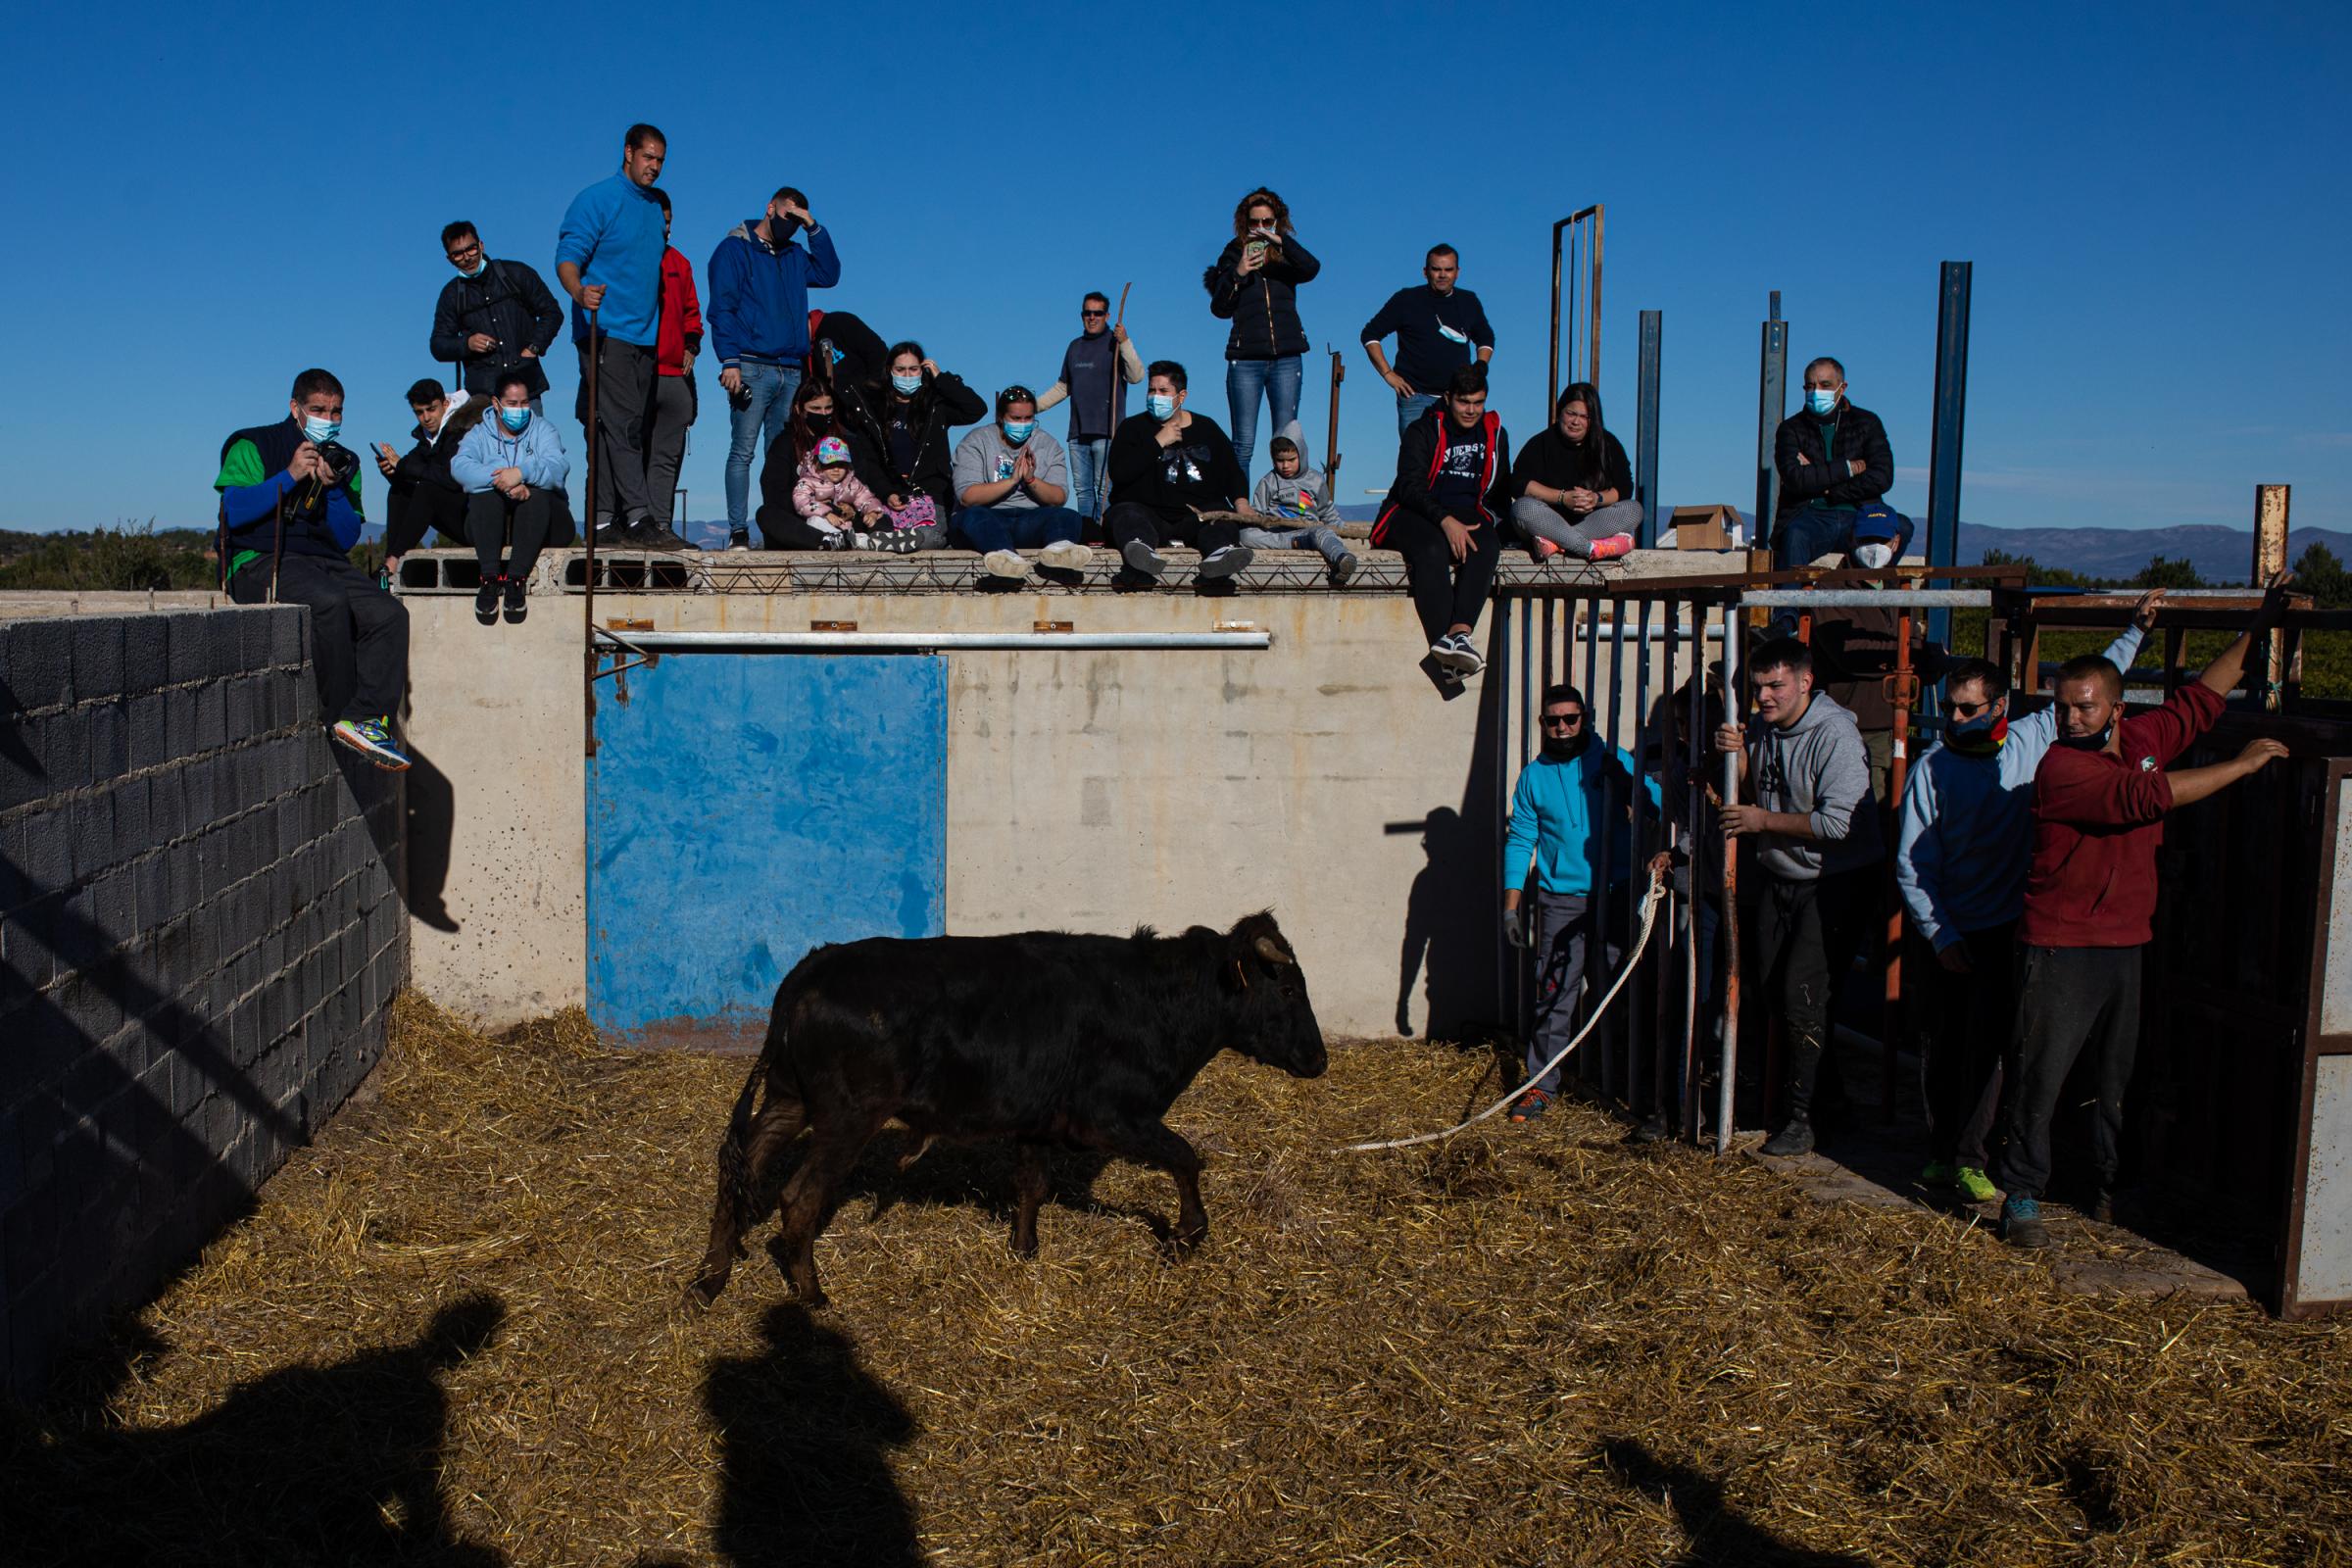 Spain's Dwindling Bullfighting Traditions - VALENCIA, SPAIN - DECEMBER 04: Family and friends of...